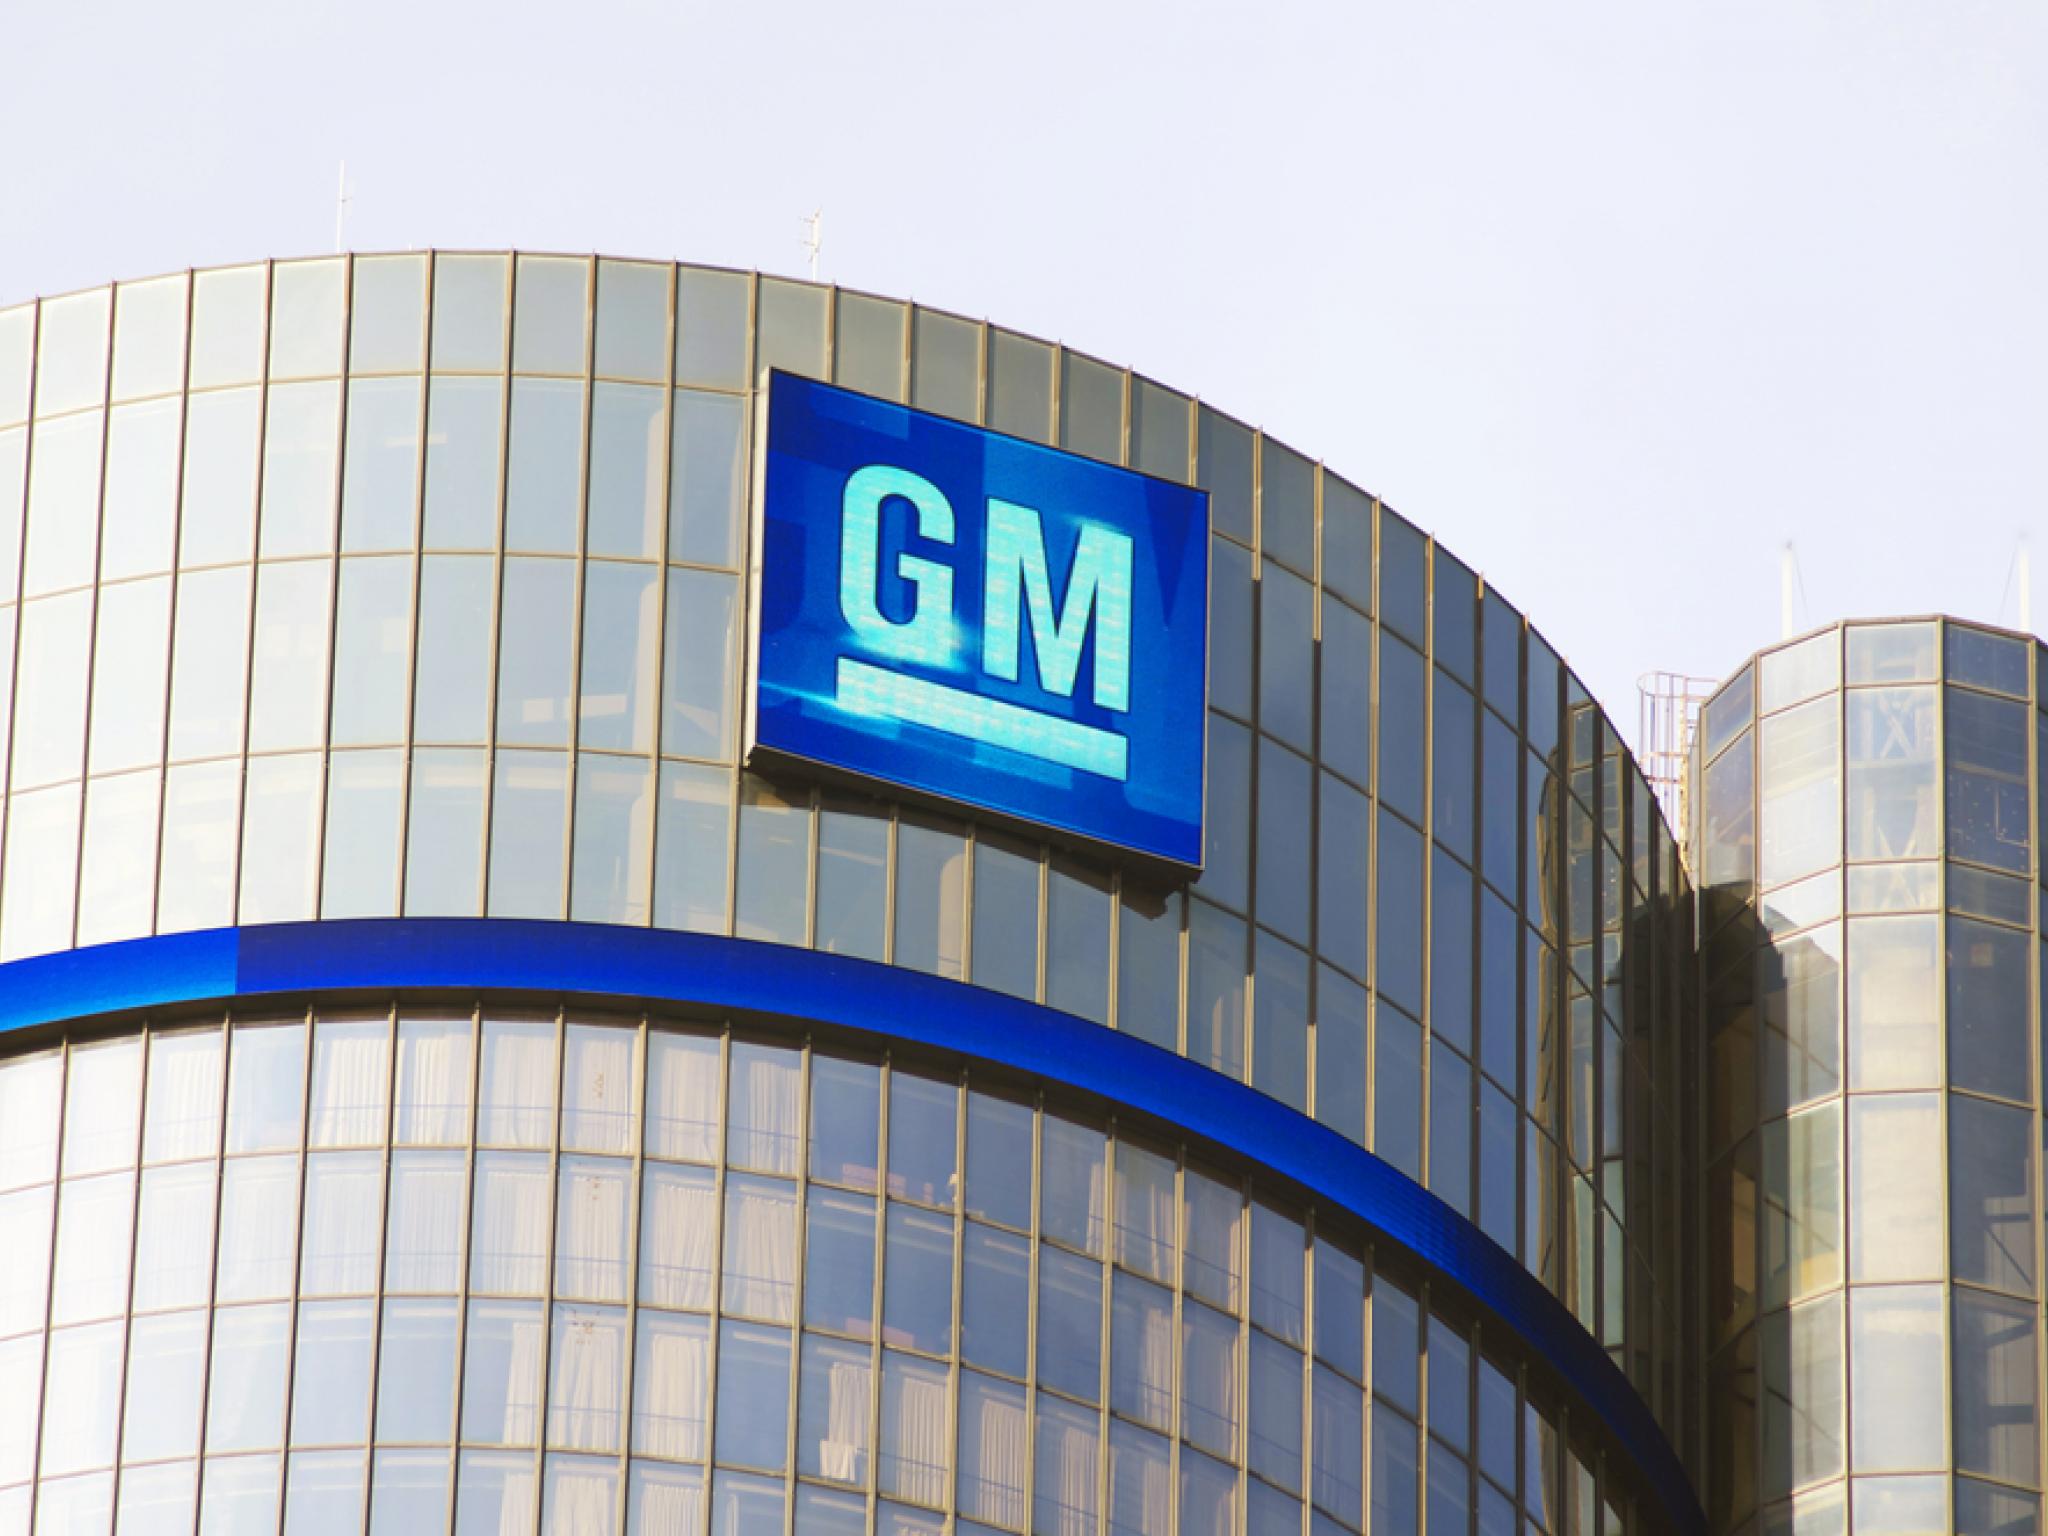  general-motors-adjusts-ev-production-target-resumes-cruise-operations-in-houston 